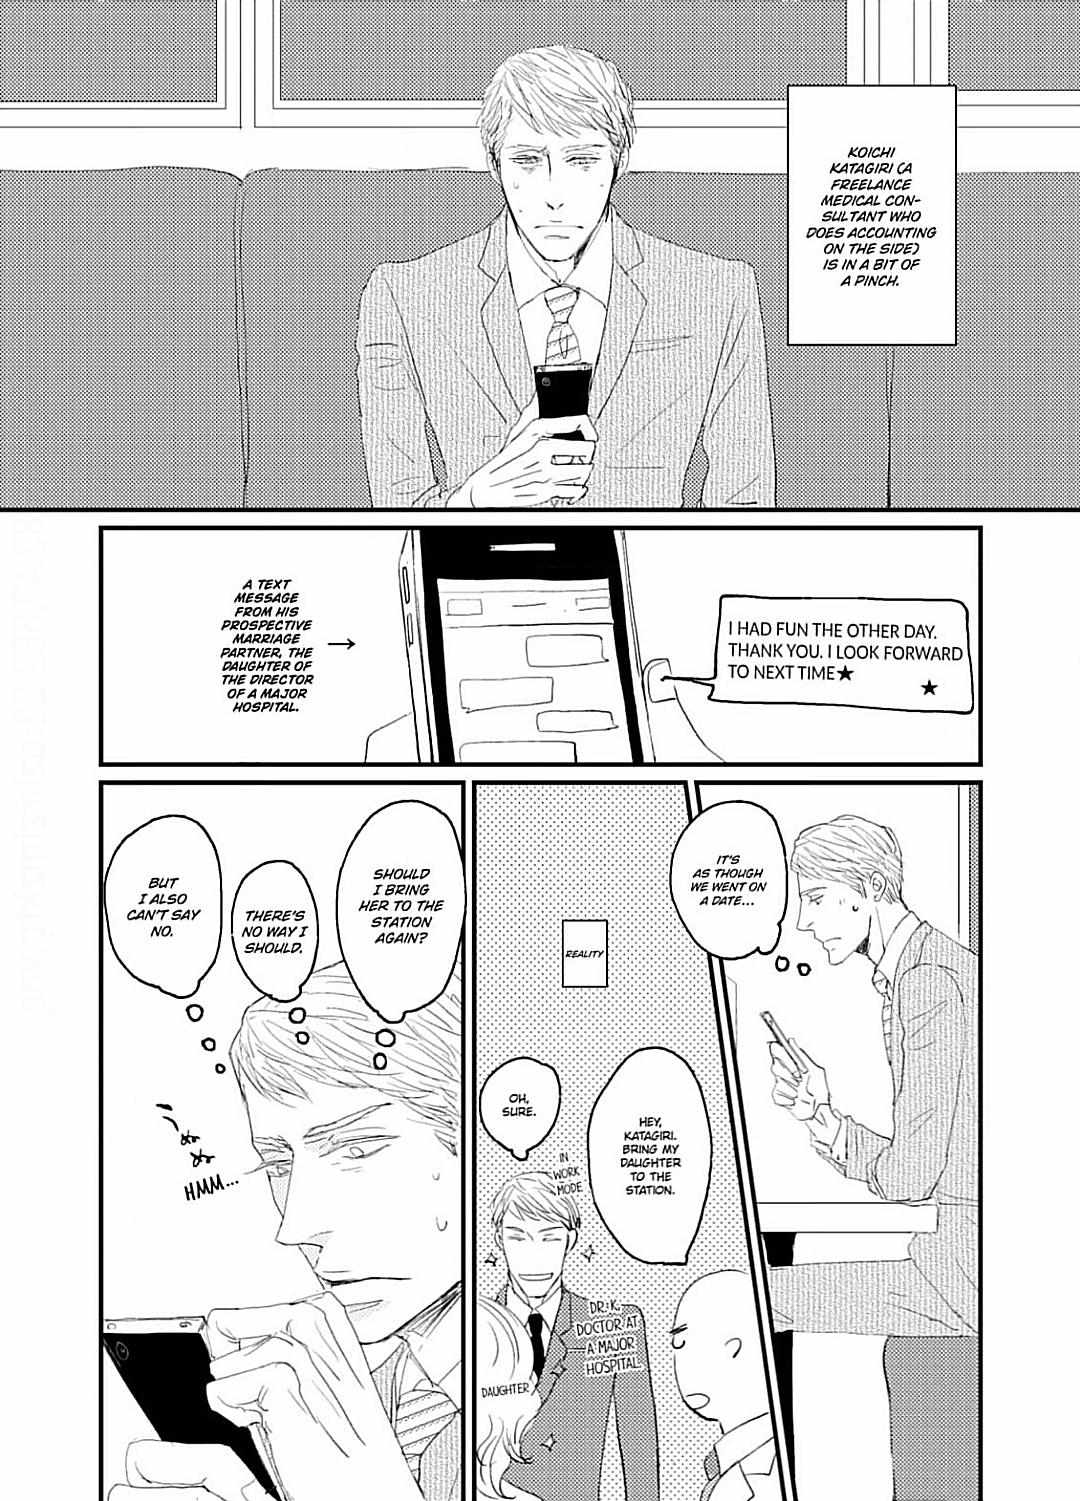 Collaring A Stray Cat - chapter 3 - #6